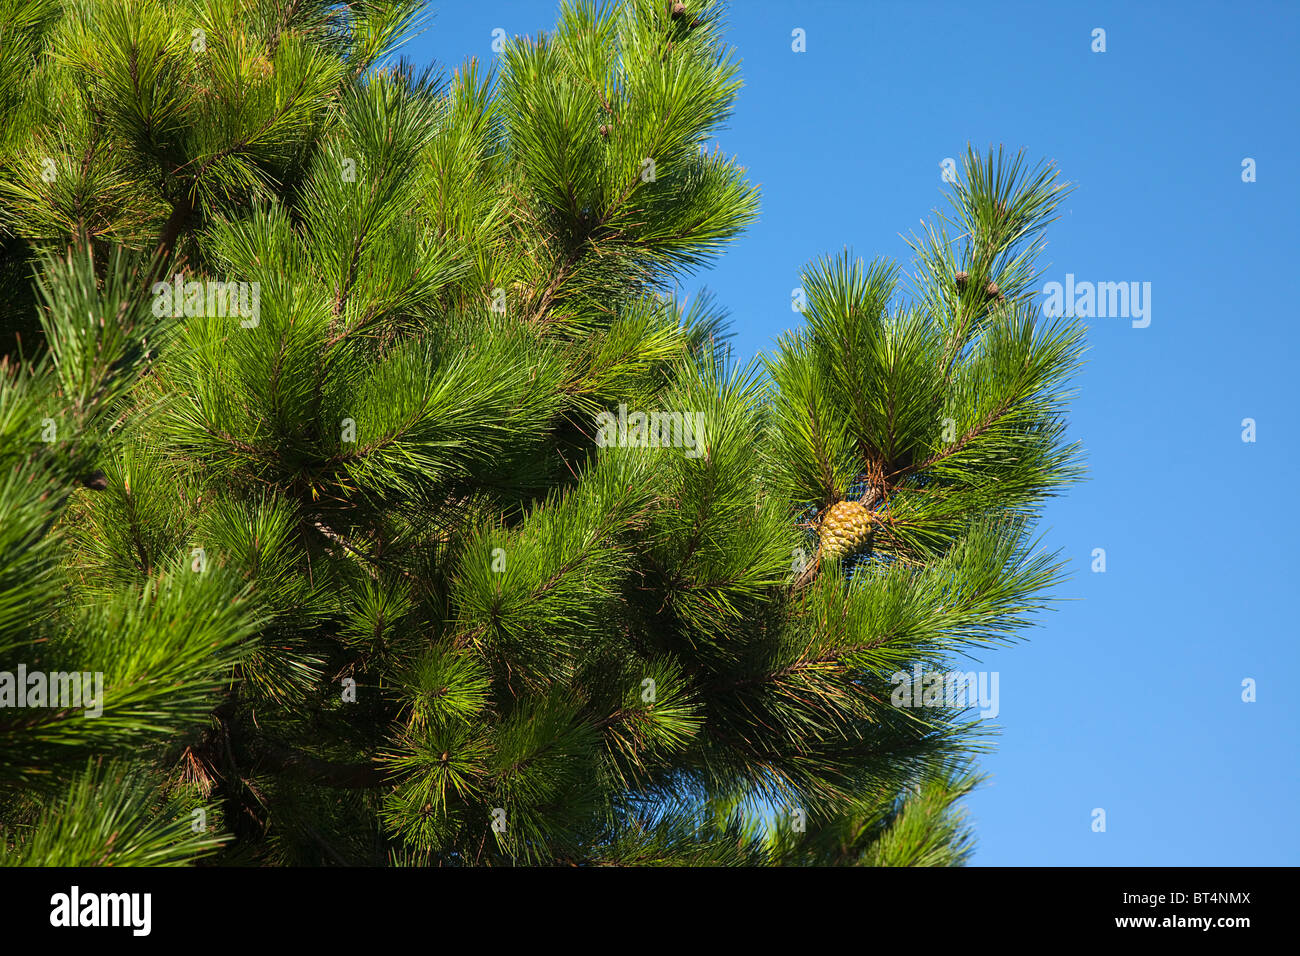 Flora & Fauna, Plants Trees, Detail of pine tree with pine cones visible. Stock Photo